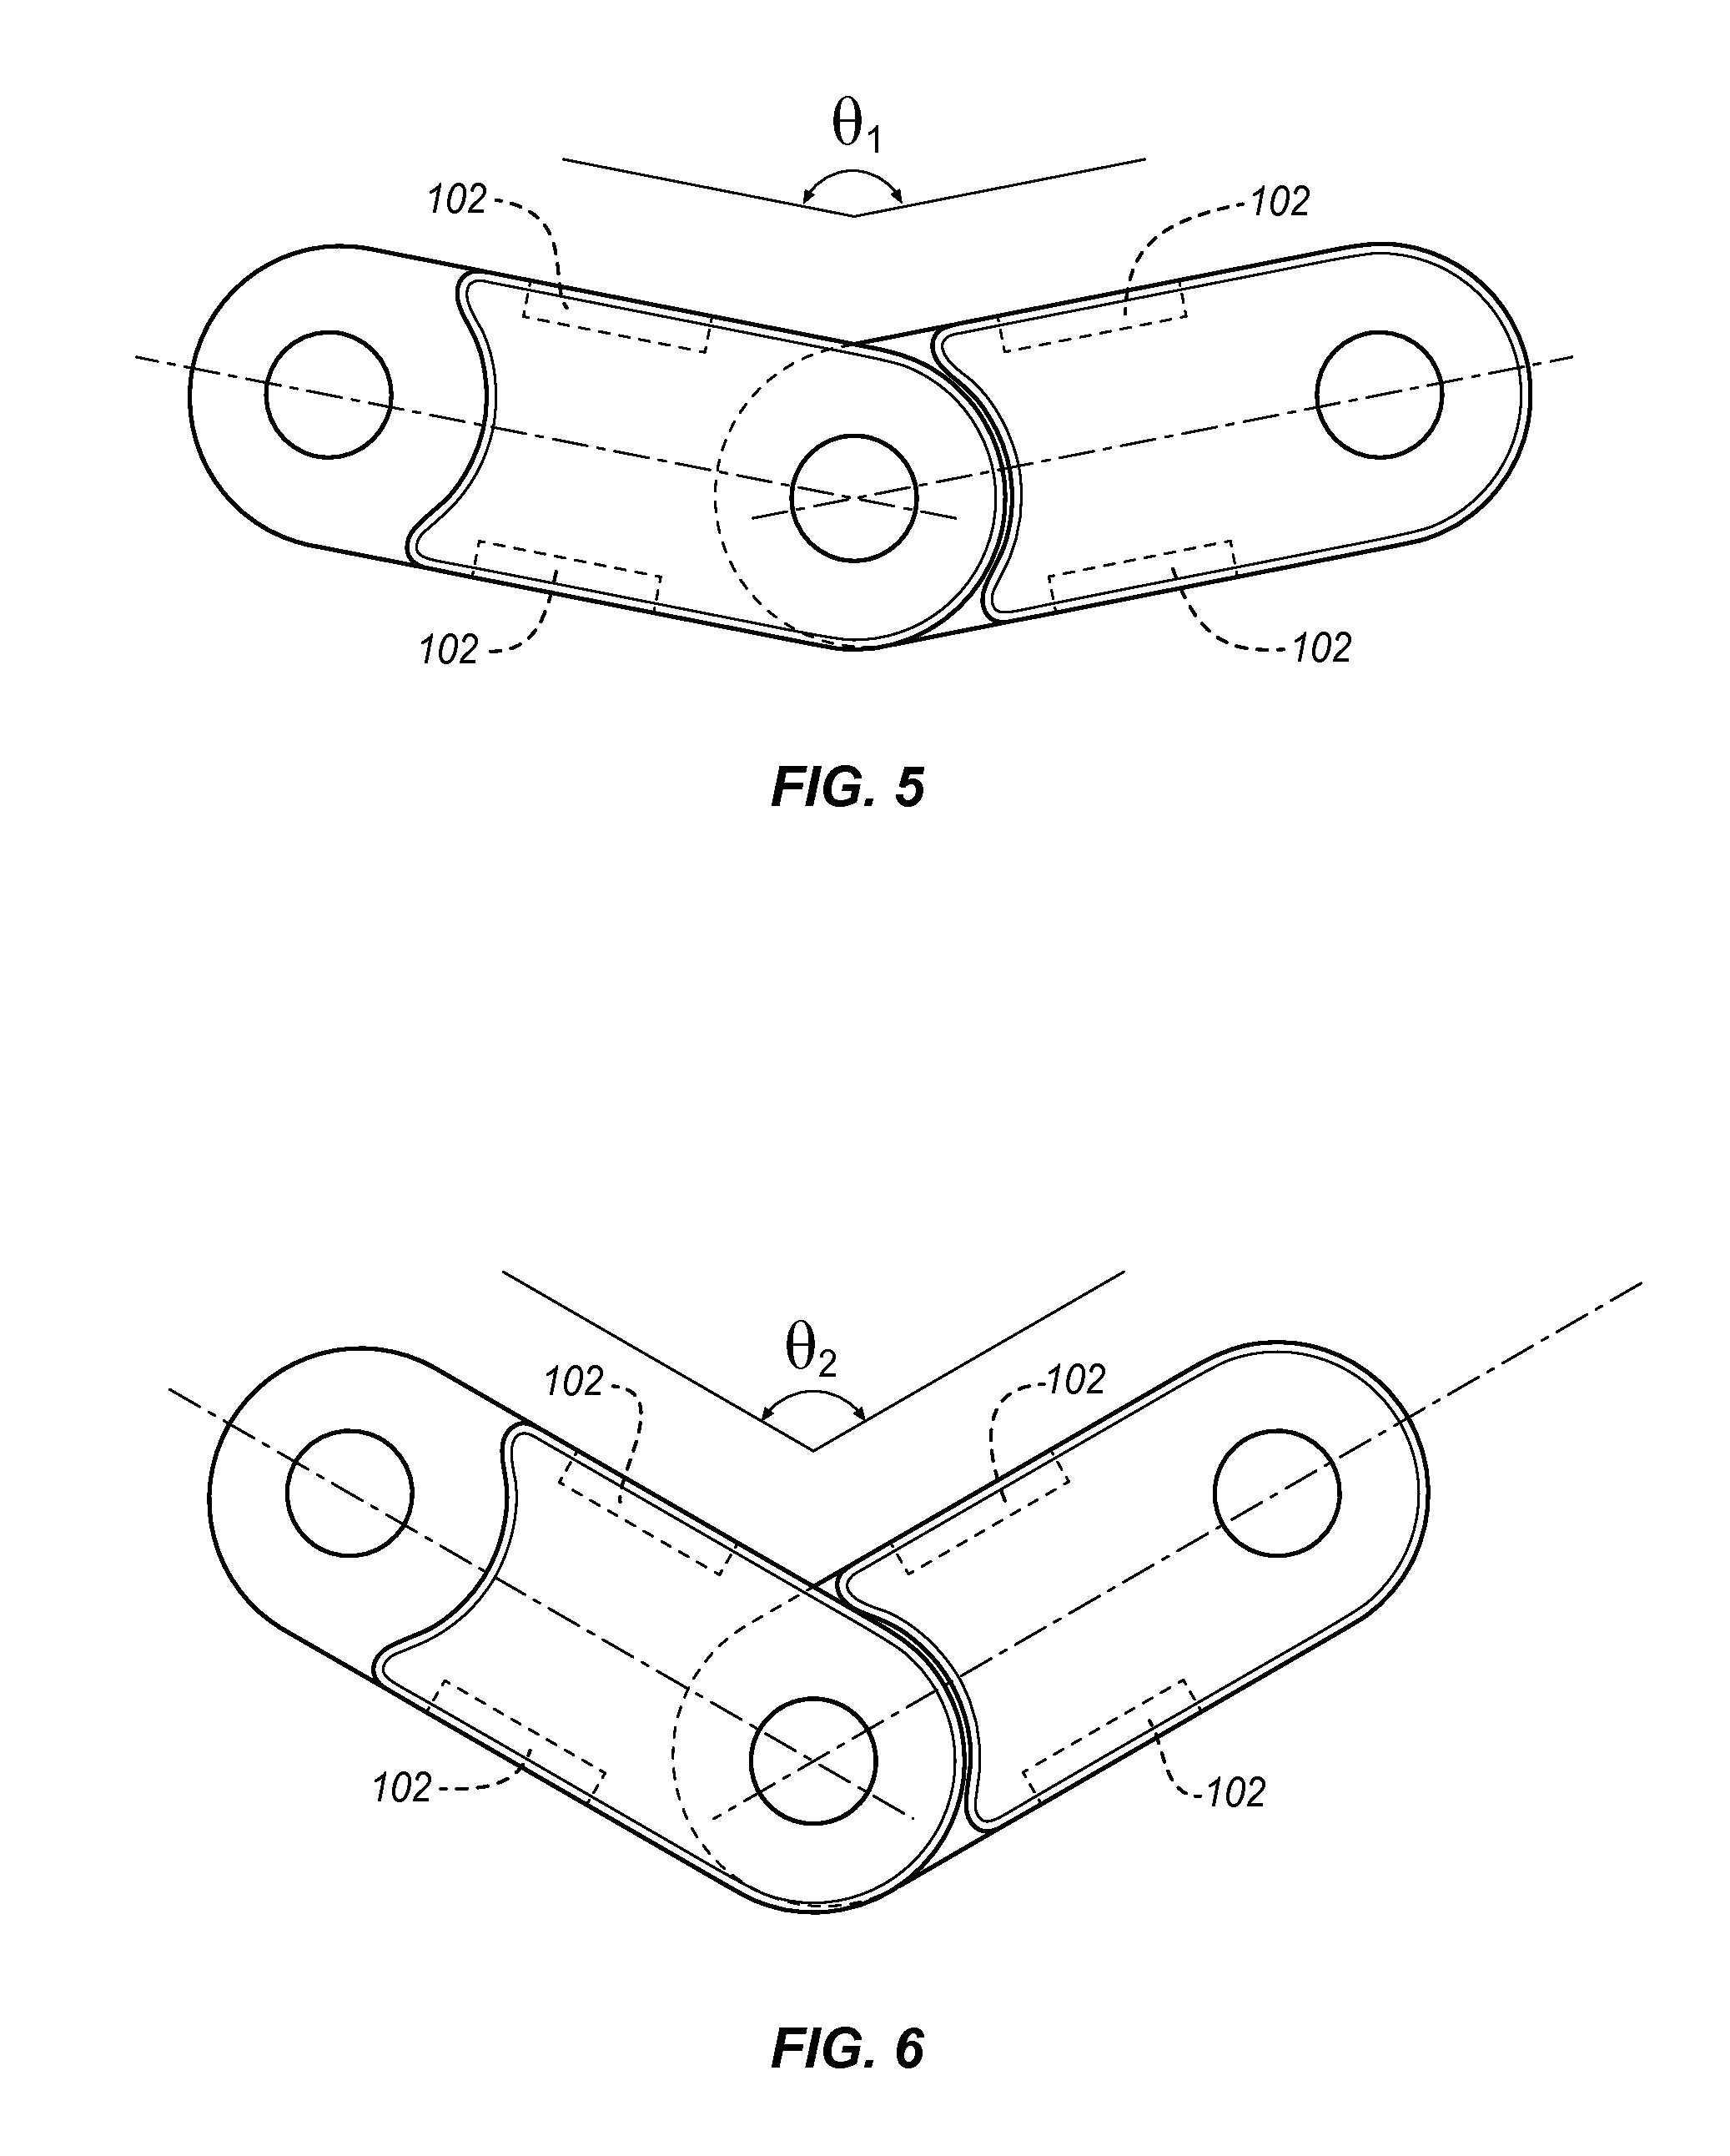 Systems and methods for tool-less retractable storage of lengths of cable chain